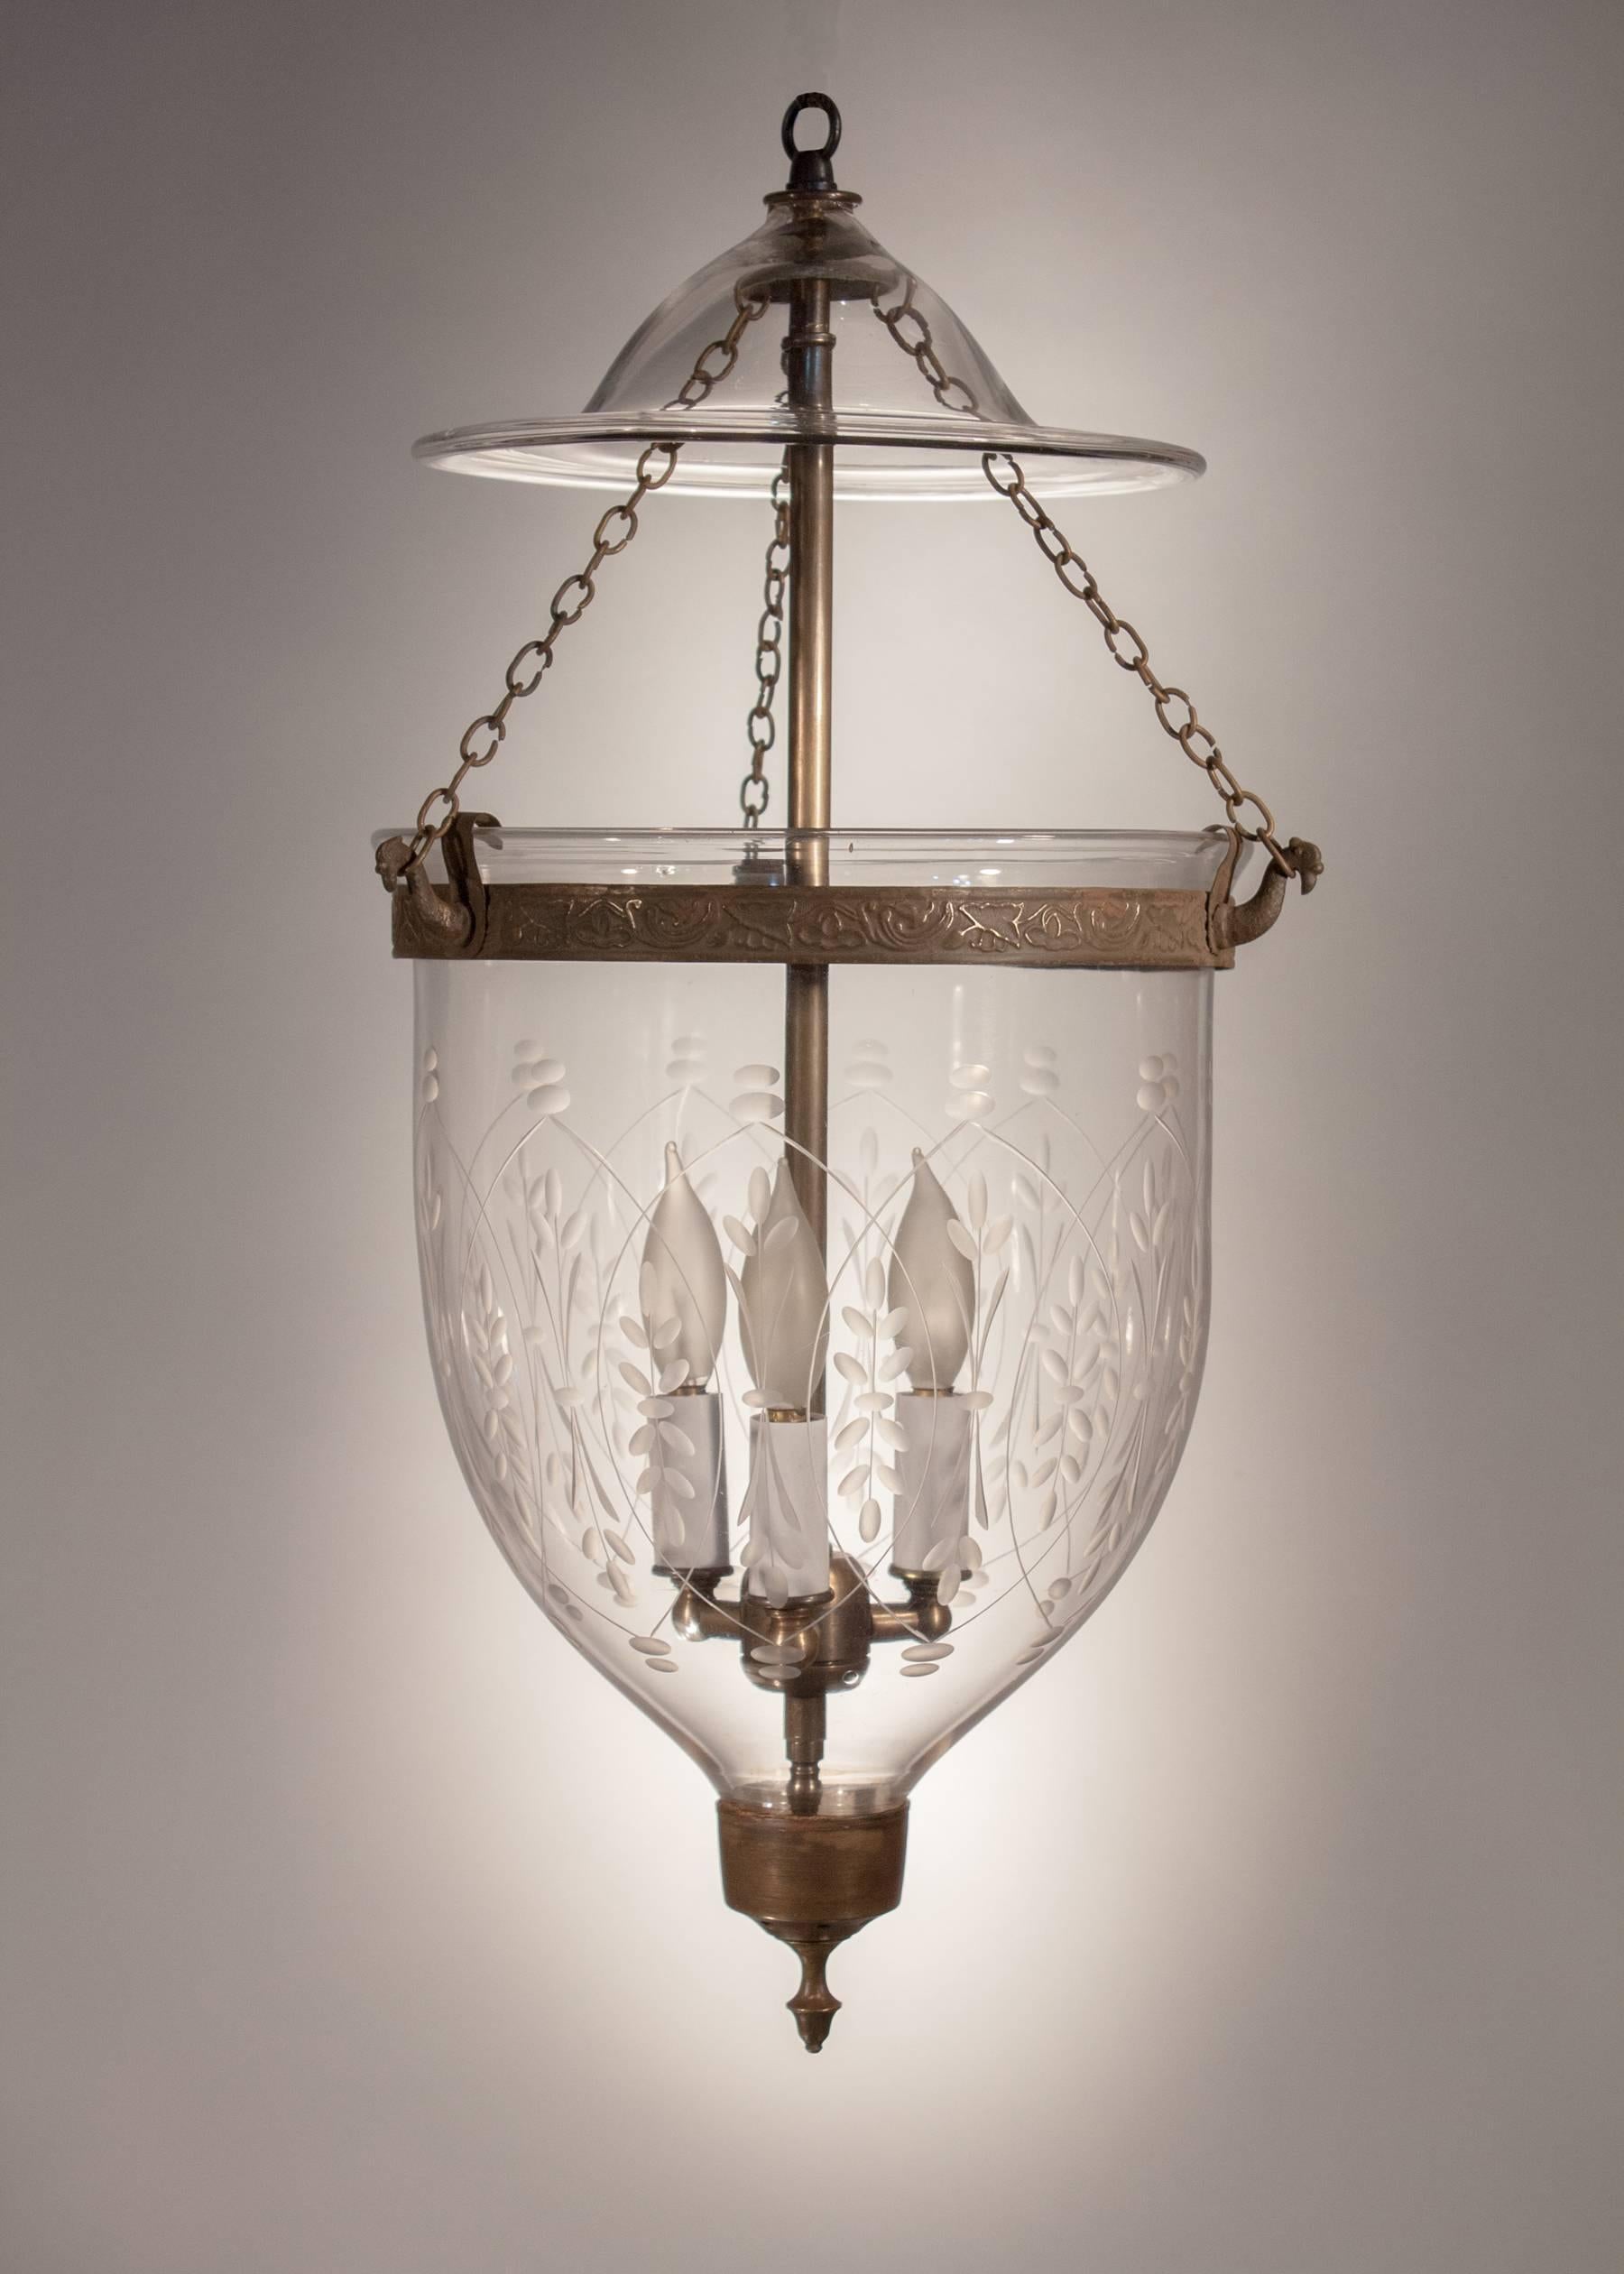 A classic, handblown glass bell jar lantern with an etched wheat motif that accents the contour of this authentic lantern. The smoke bell is period and the brass accents are original with the exception of the embossed band, which has been replaced